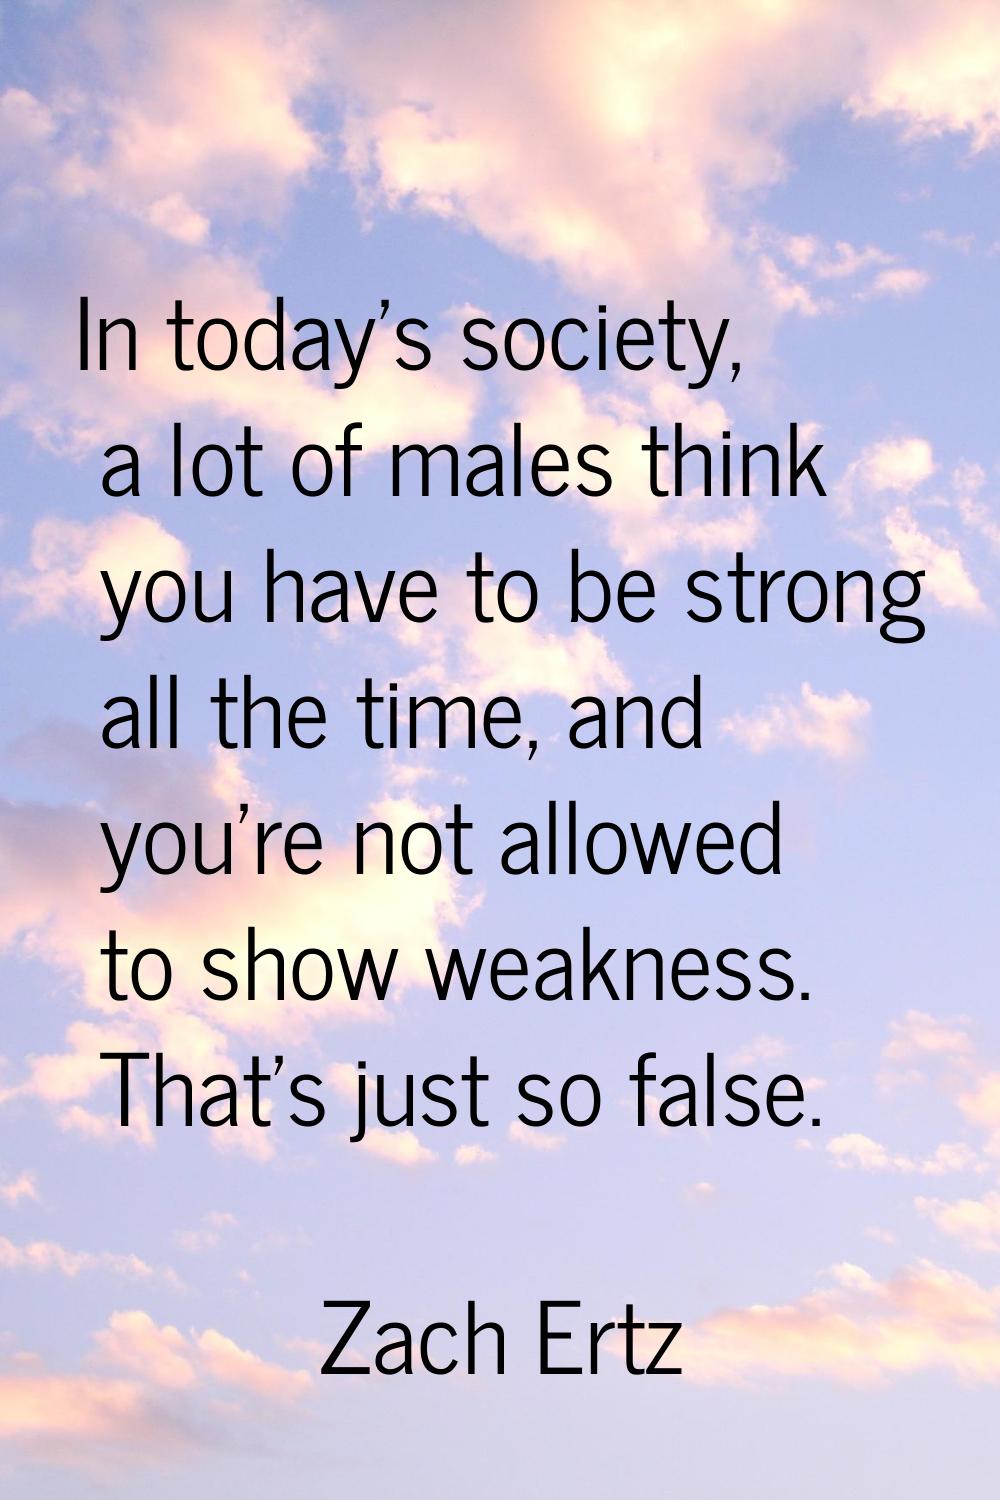 In today's society, a lot of males think you have to be strong all the time, and you're not allowed